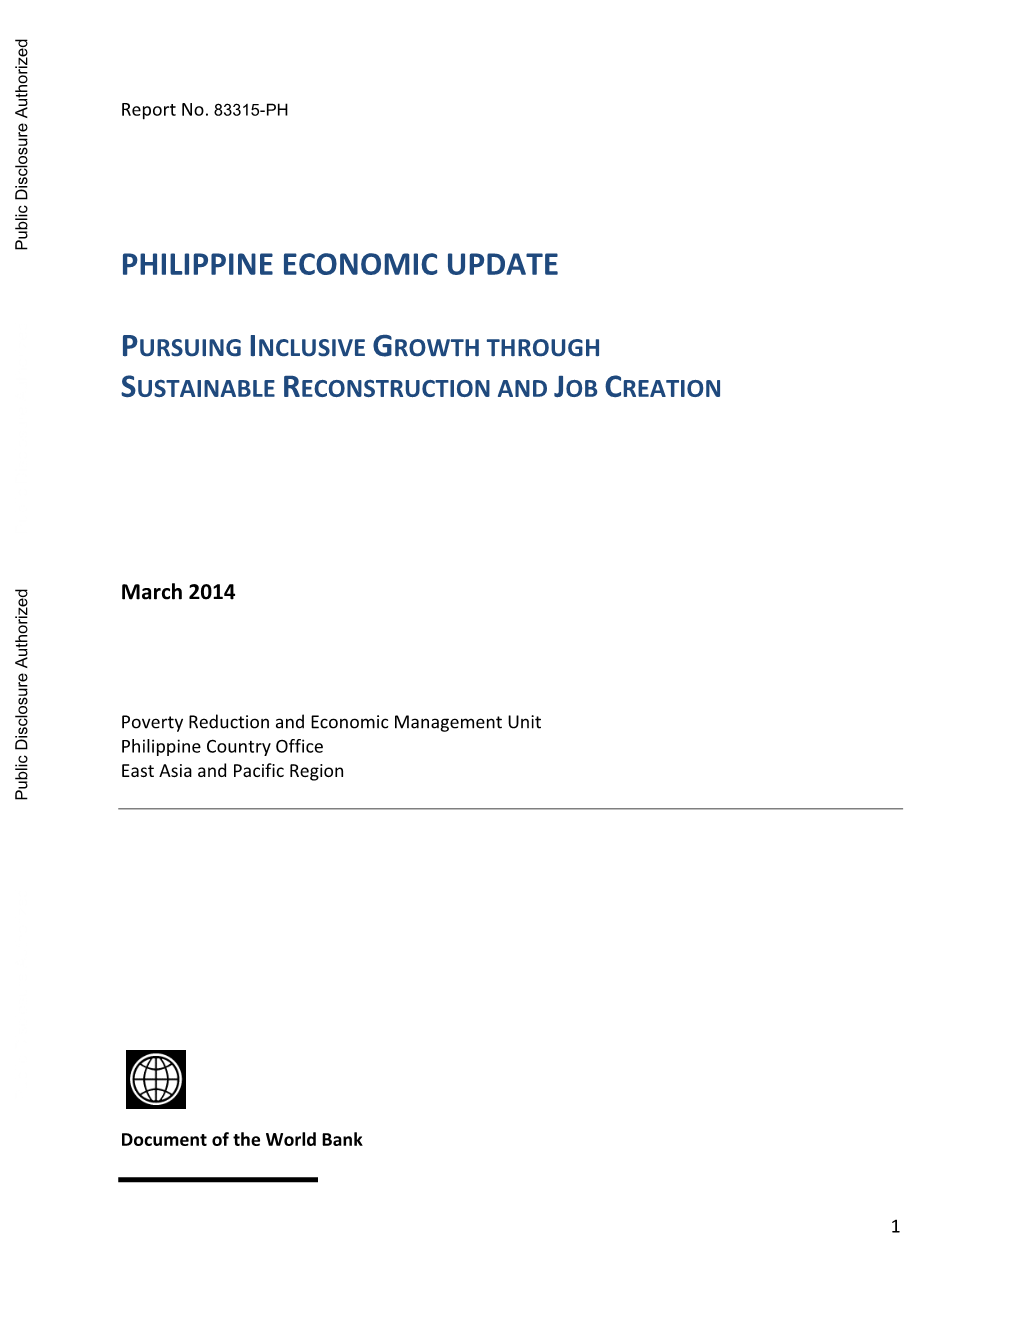 Philippine Economic Update Pursuing Inclusive Growth Through Sustainable Reconstruction and Job Creation